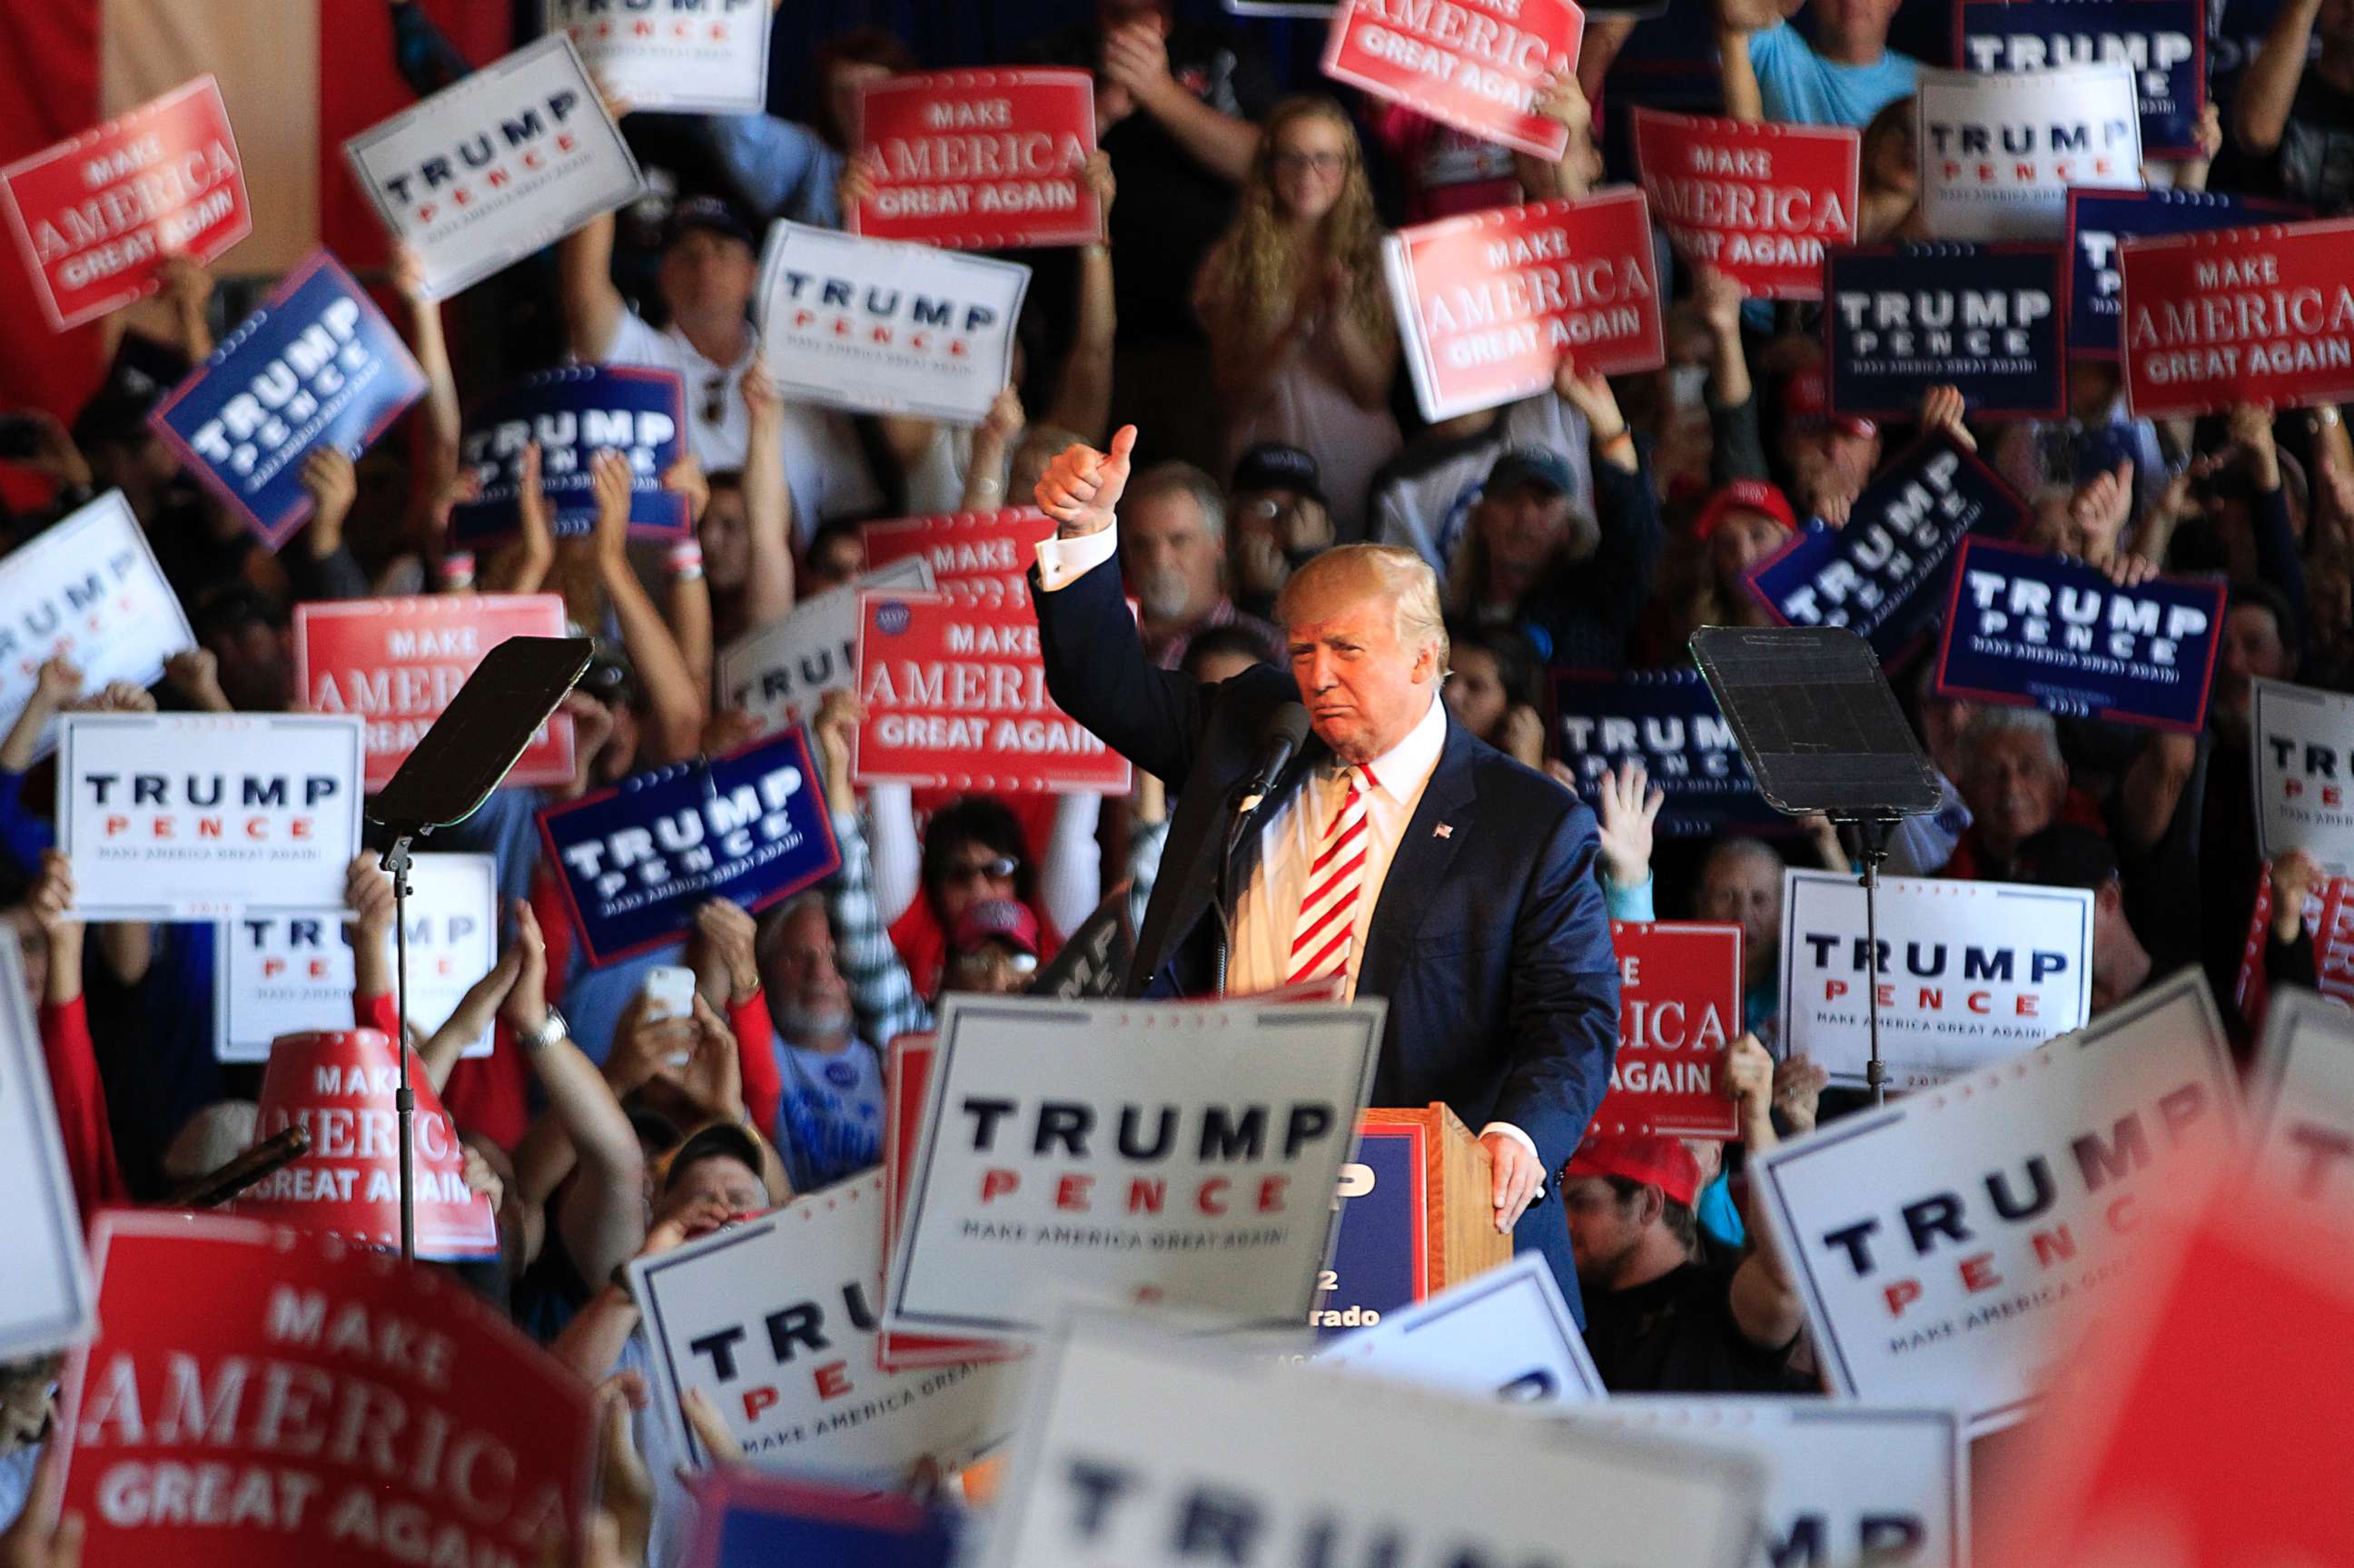 PHOTO: Republican presidential candidate Donald Trump speaks at a rally on Oct. 18, 2016, in Grand Junction, Colo.